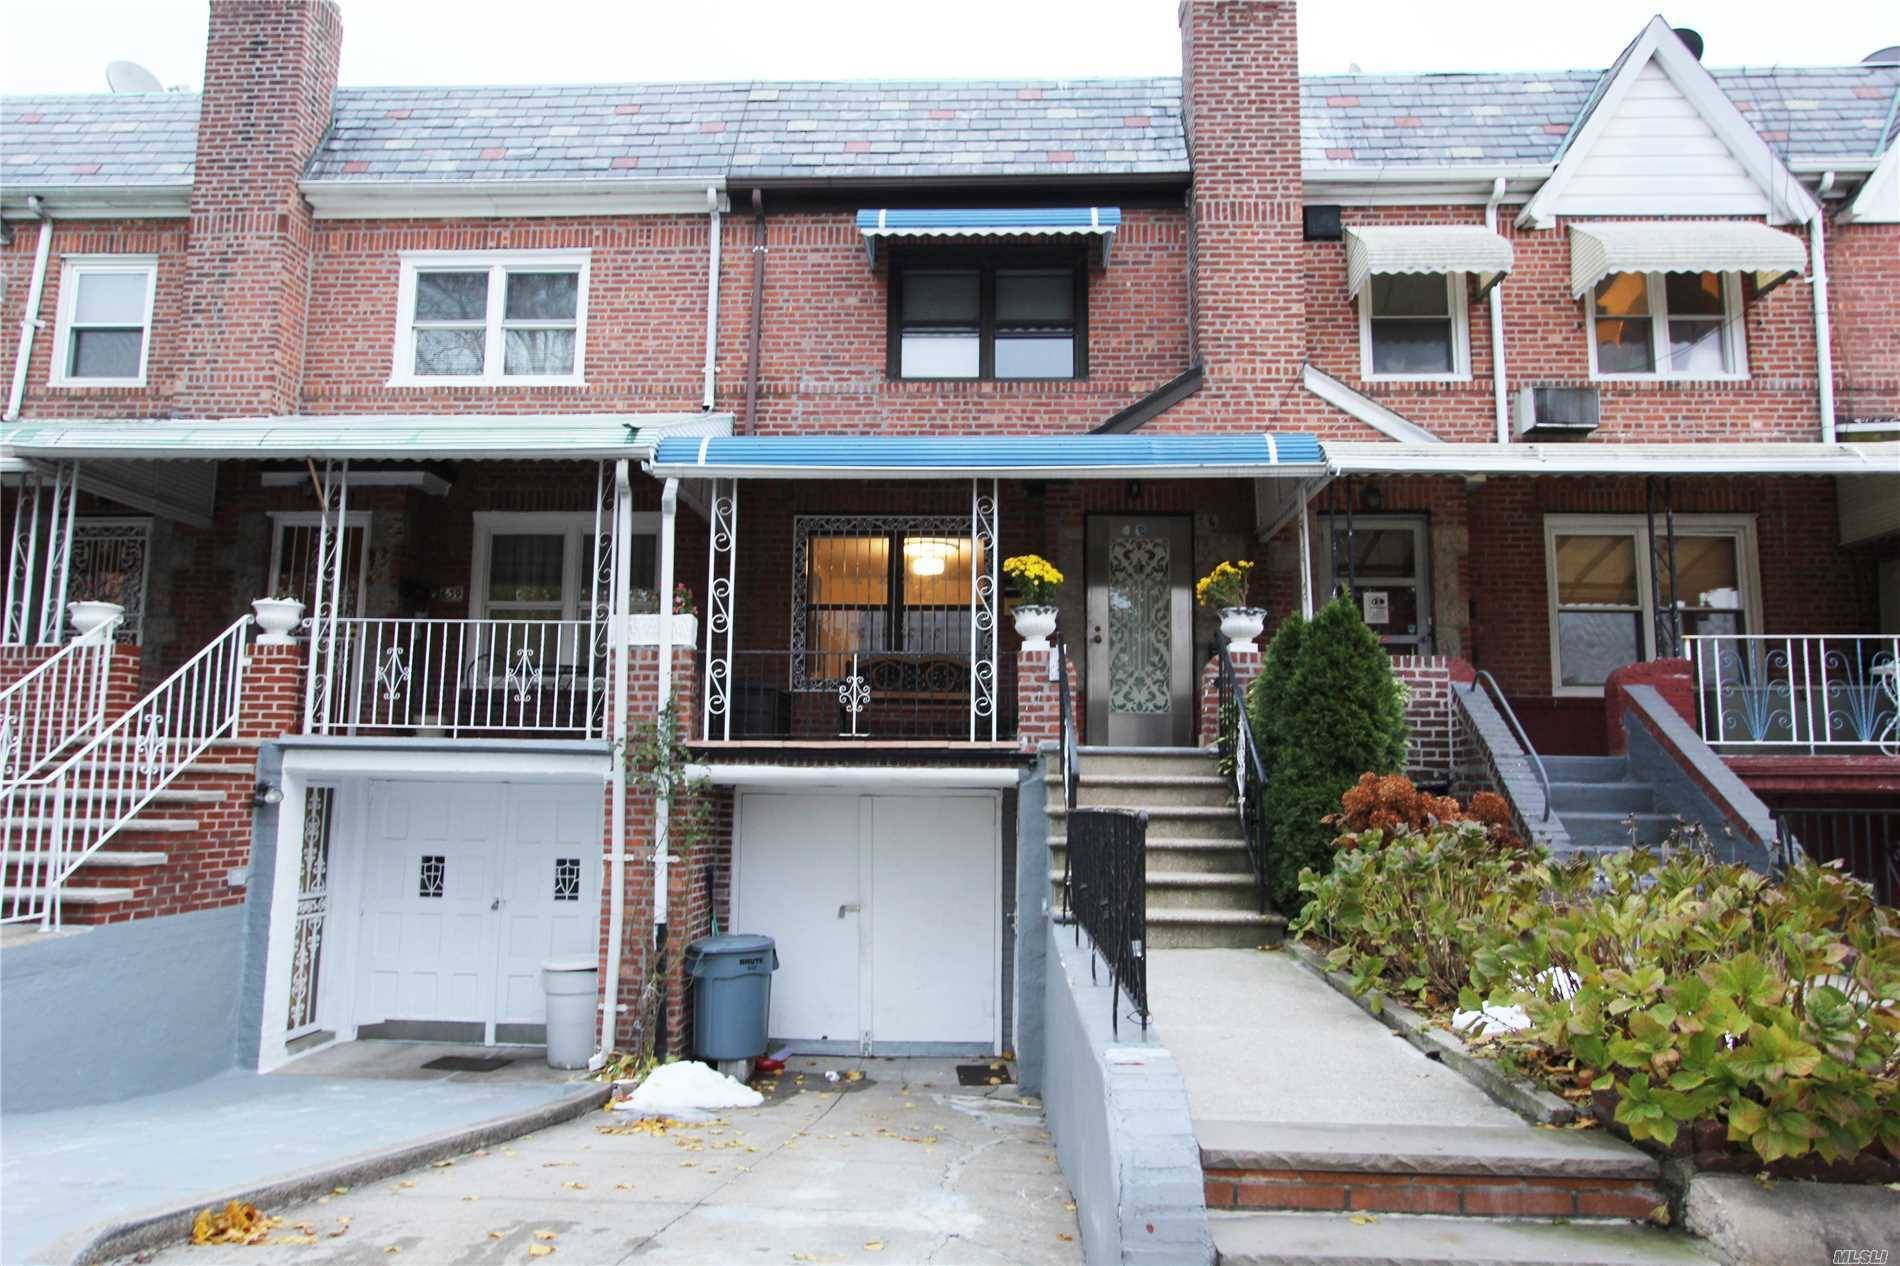 Pristine Condition Single Family Brick House In The Heart Of Woodside On The Border Of Astoria !